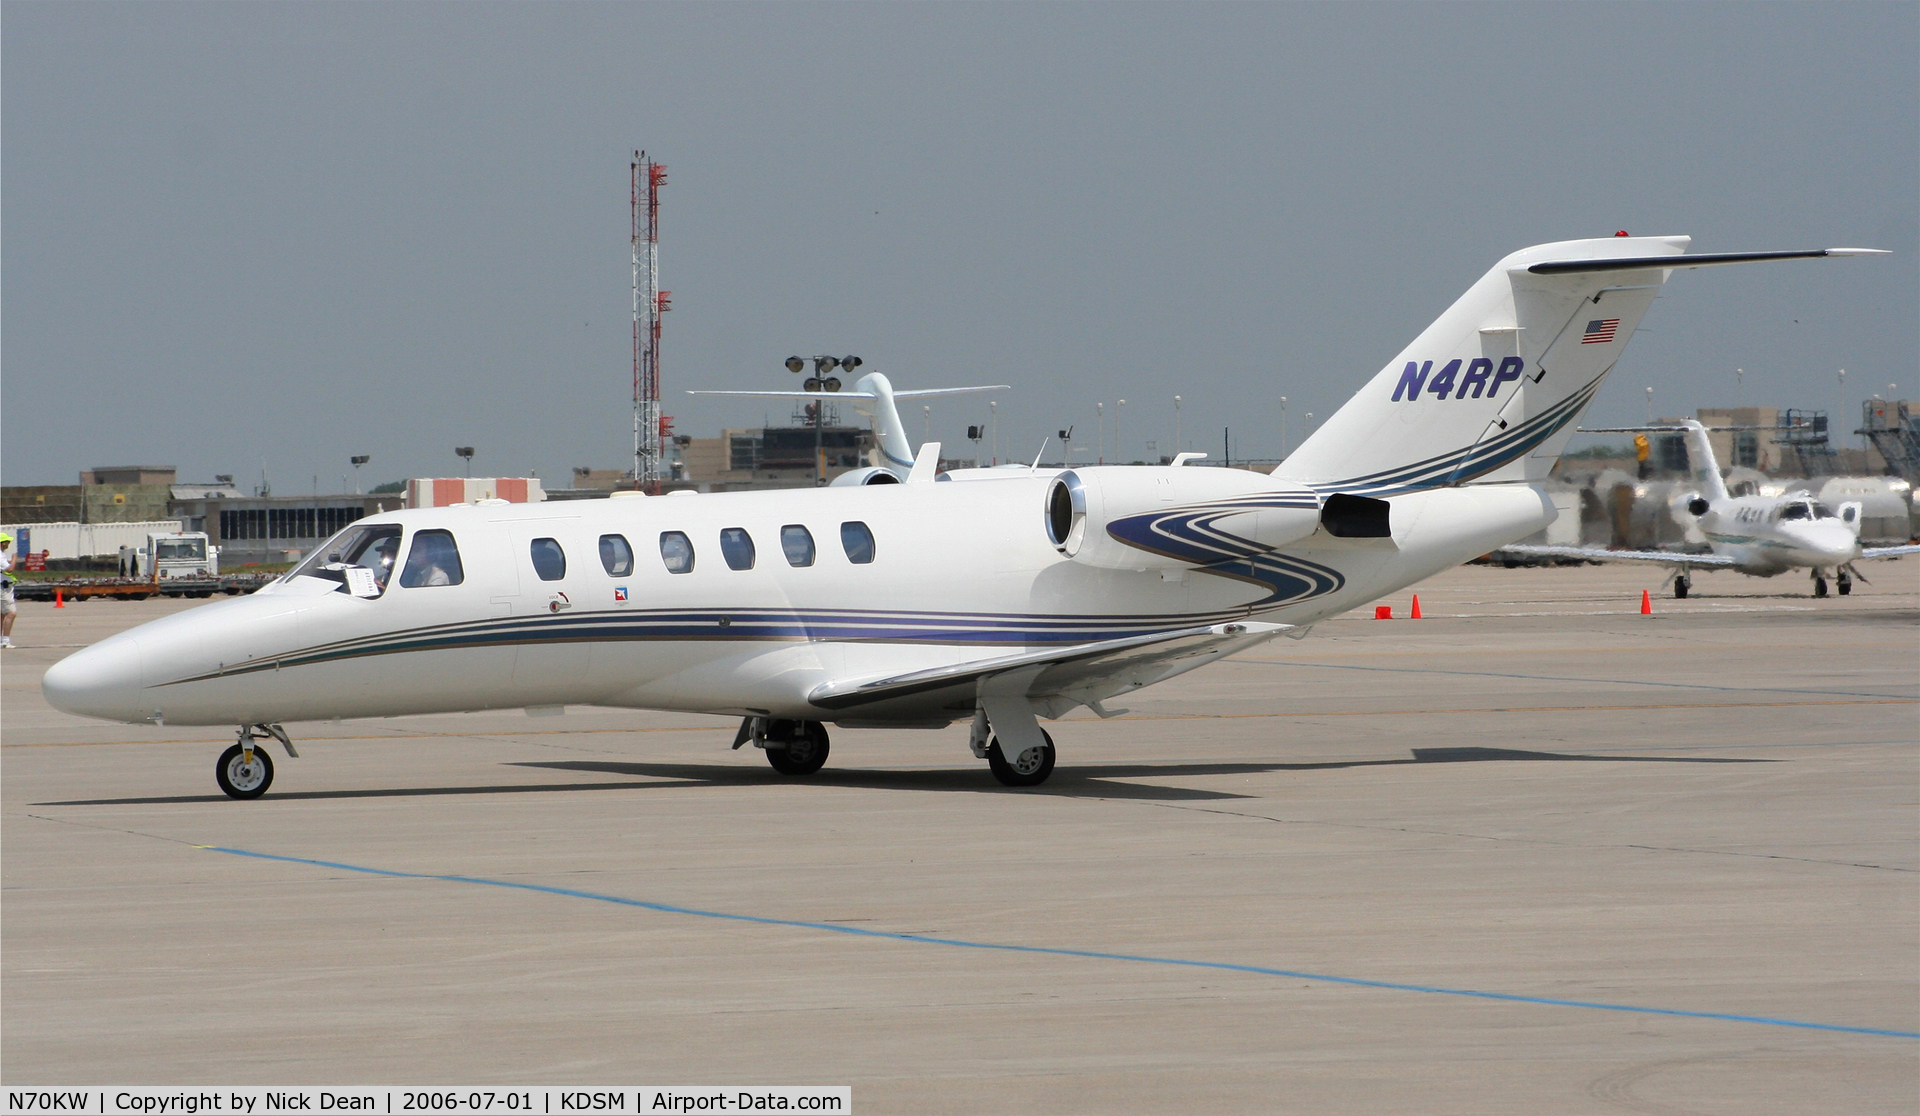 N70KW, 2002 Cessna CitationJet CJ2 C/N 525A0135, KDSM (Seen here as N4RP and currently registered N70KW as posted)